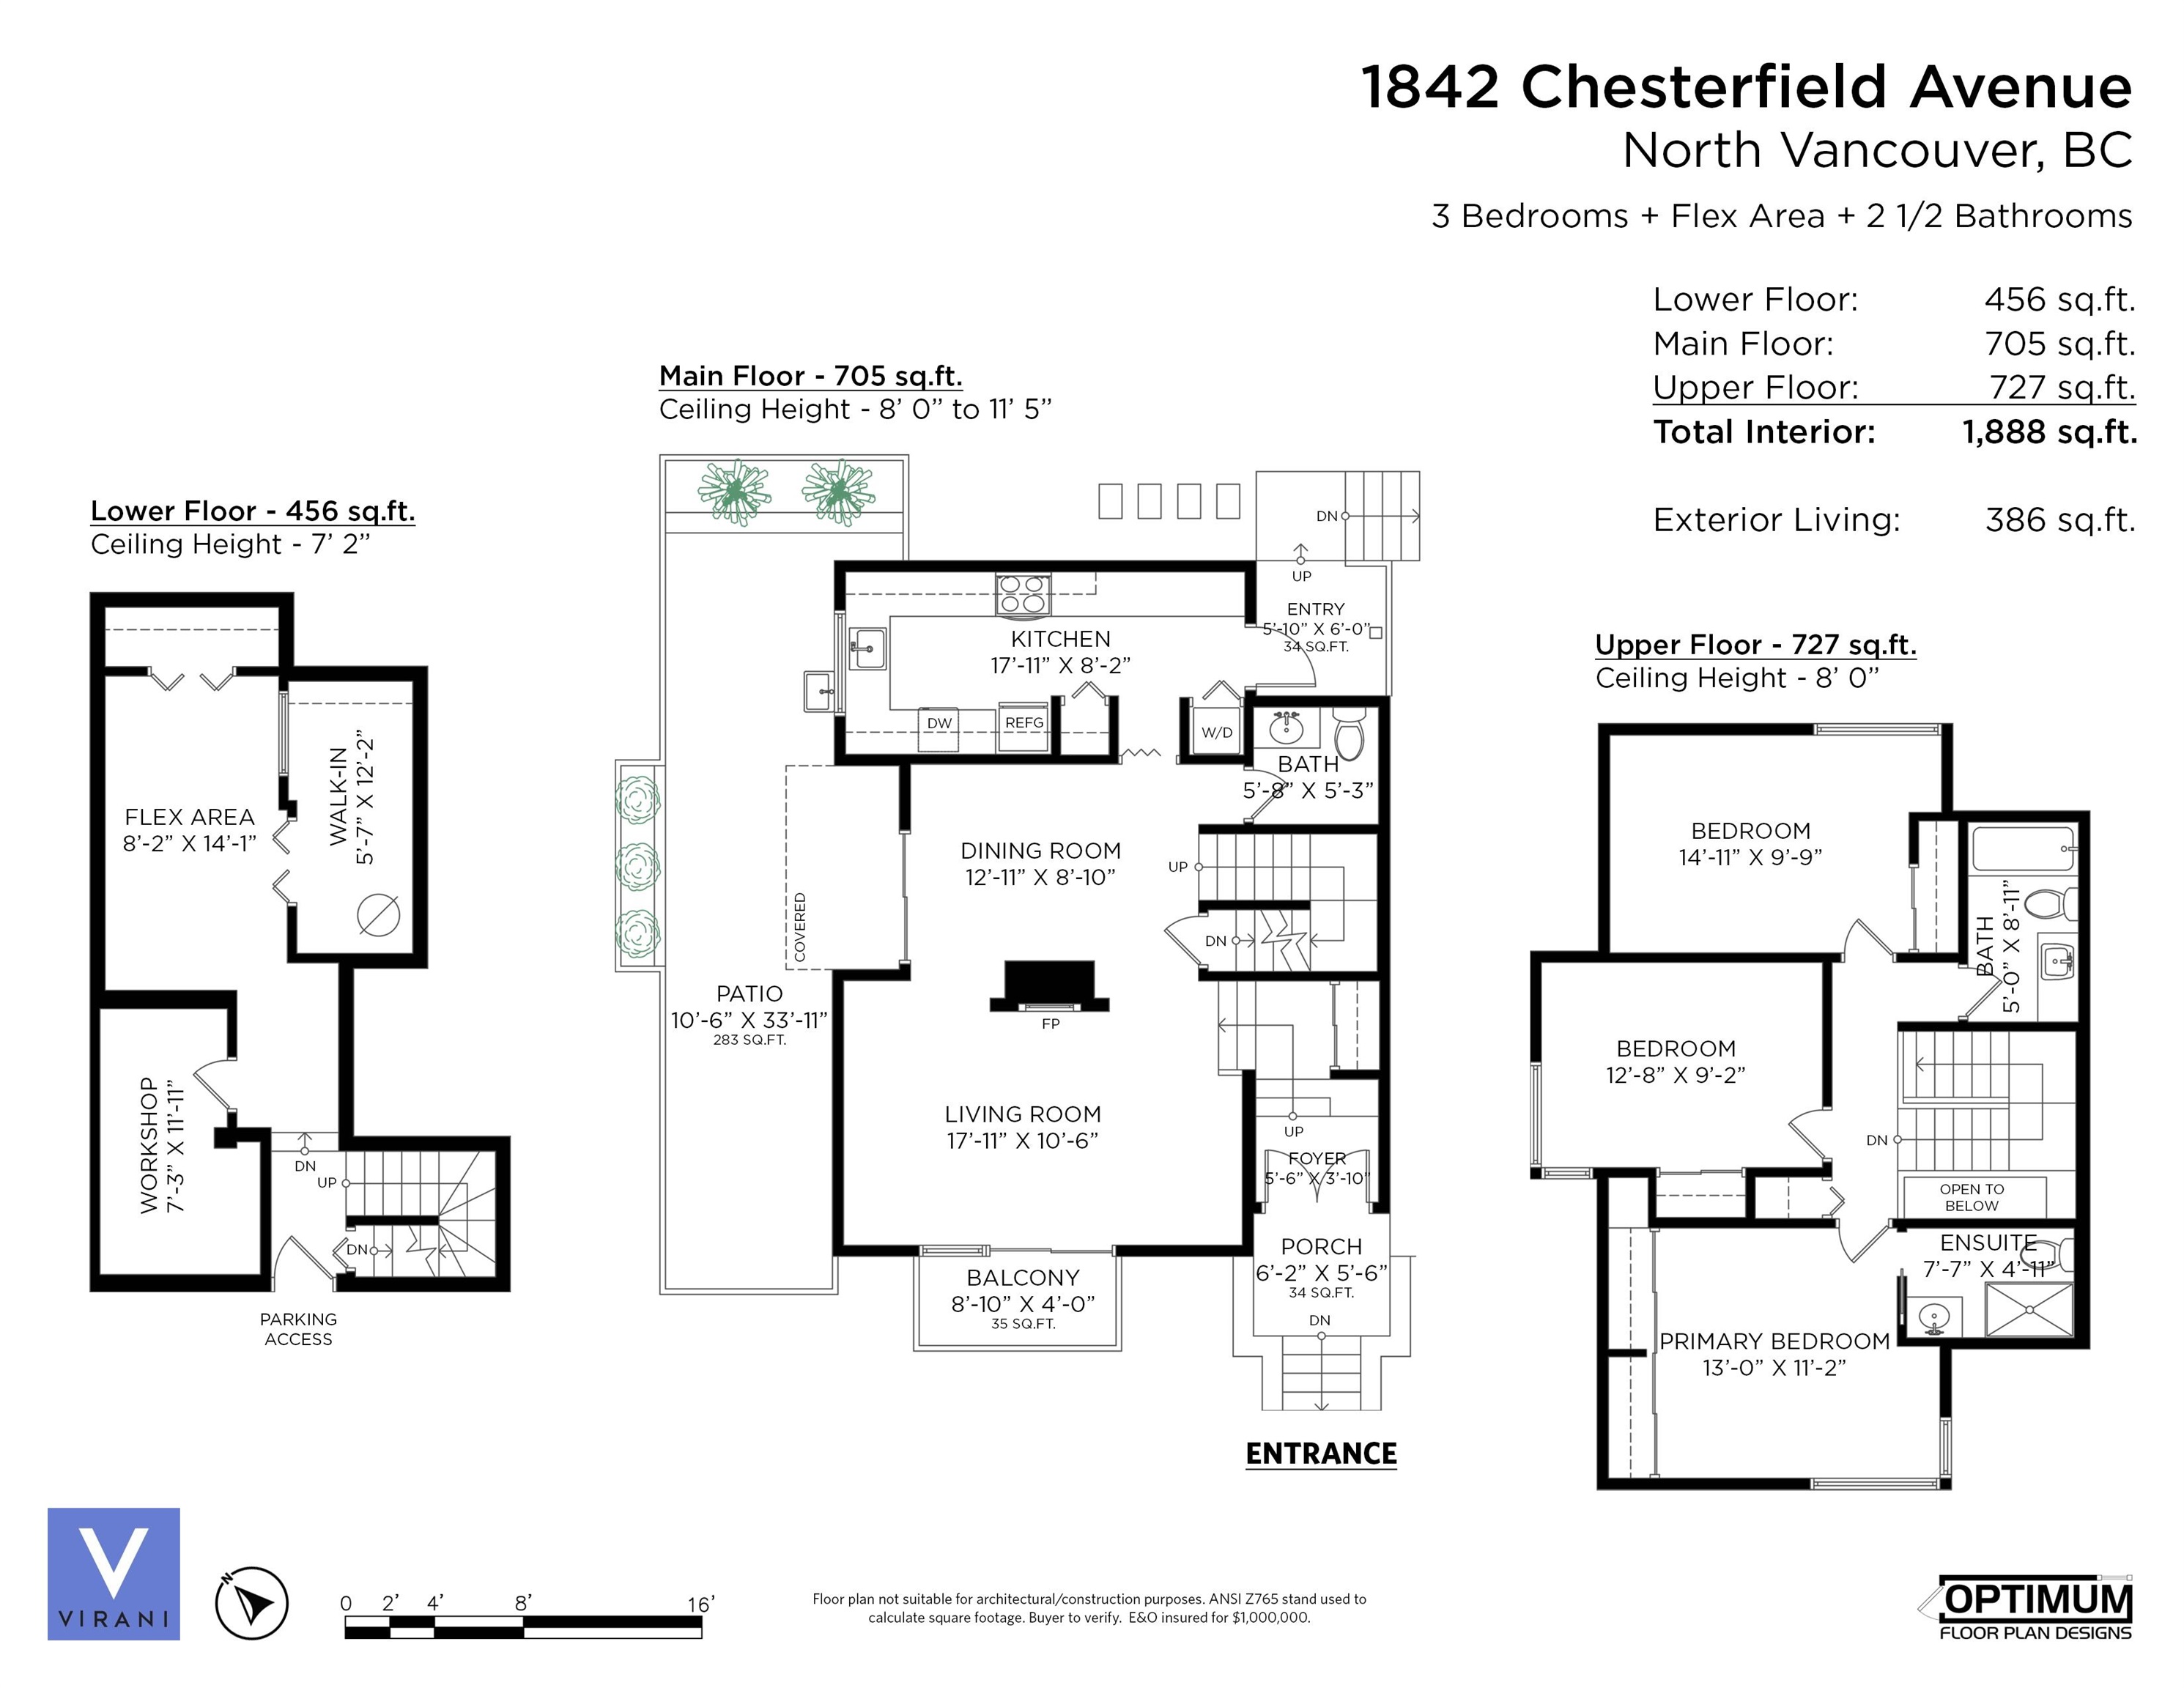 Listing image of 1842 CHESTERFIELD AVENUE